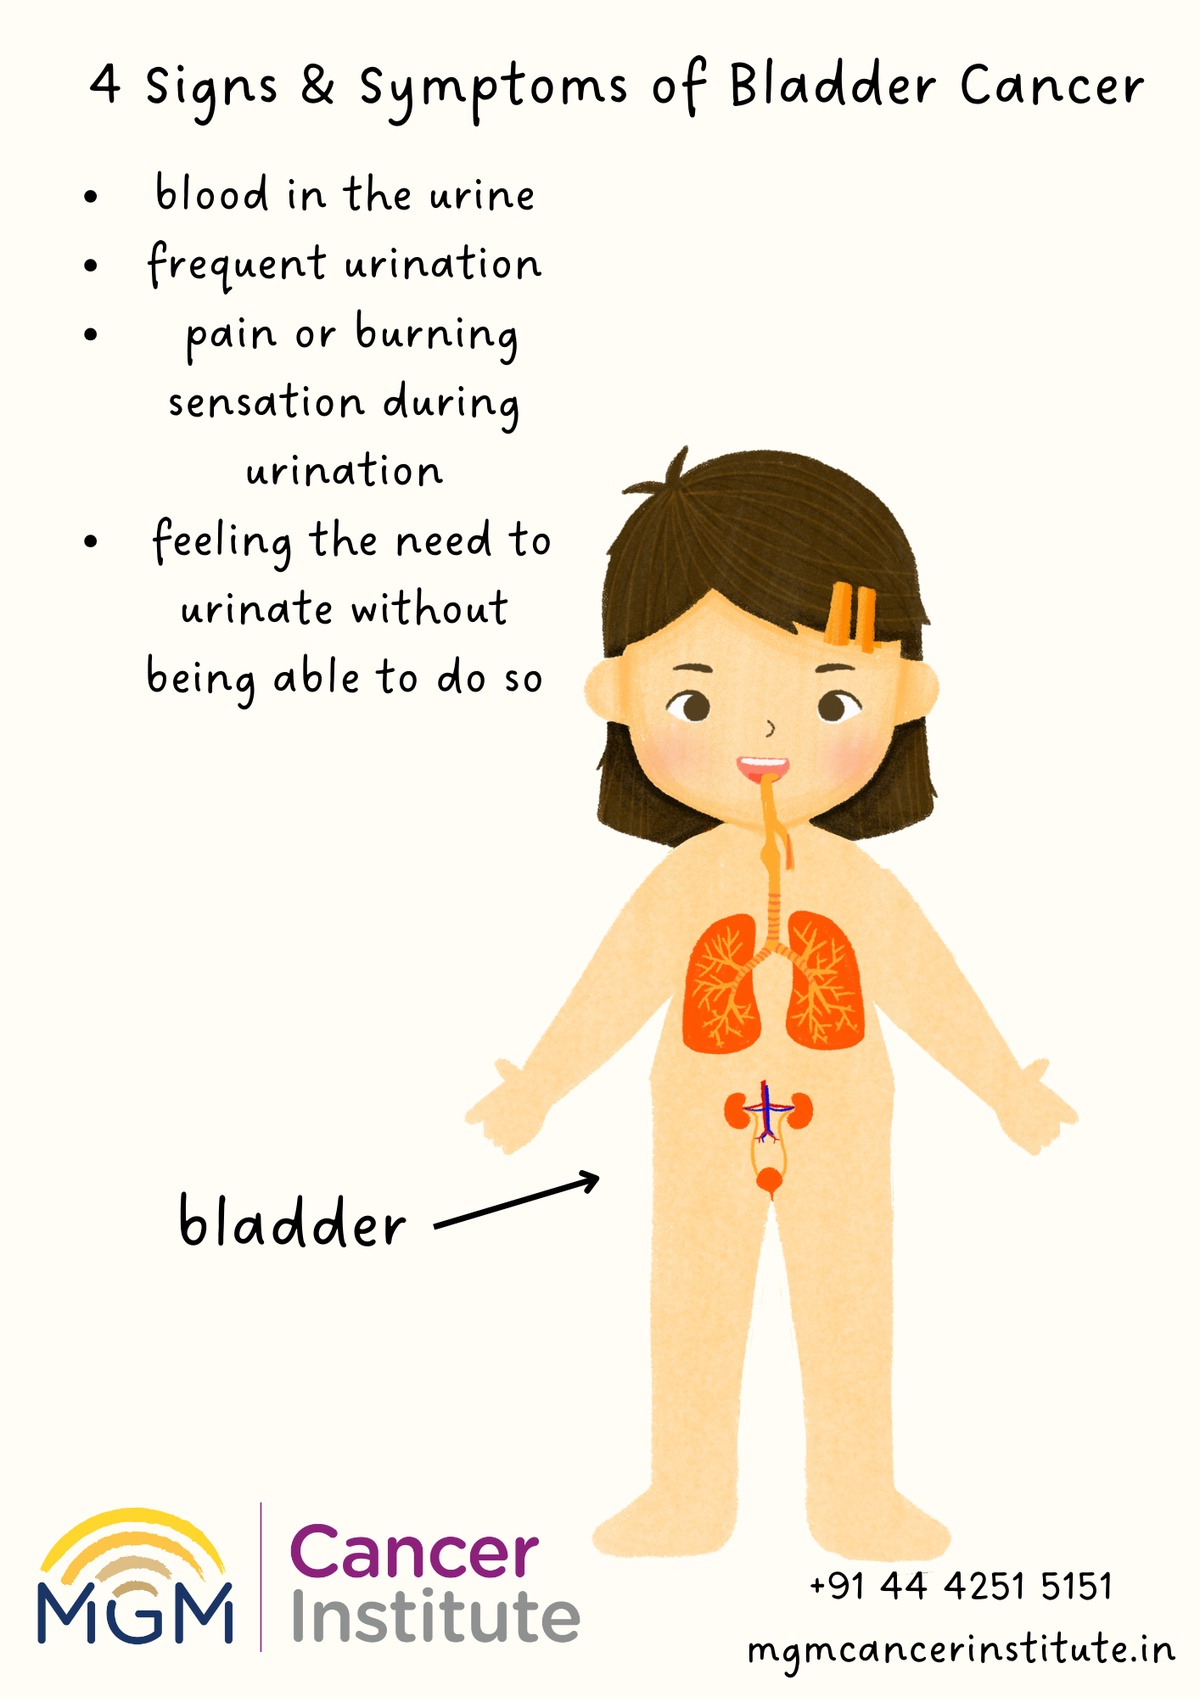 Title: 4 Signs and Symptoms of Bladder Cancer